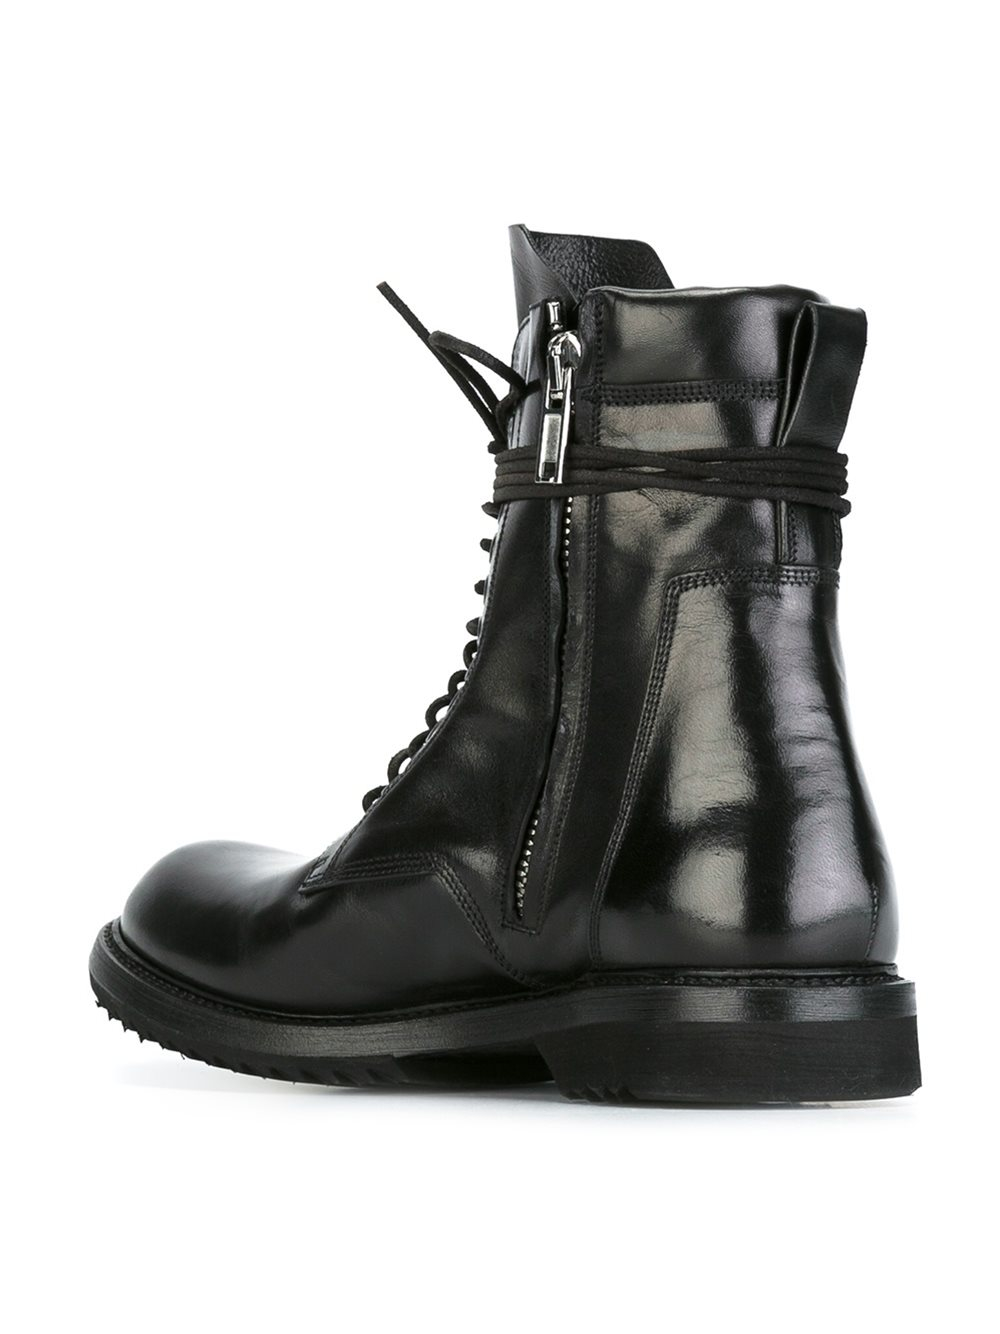 Lyst - Rick Owens Lace-up Combat Boots in Black for Men